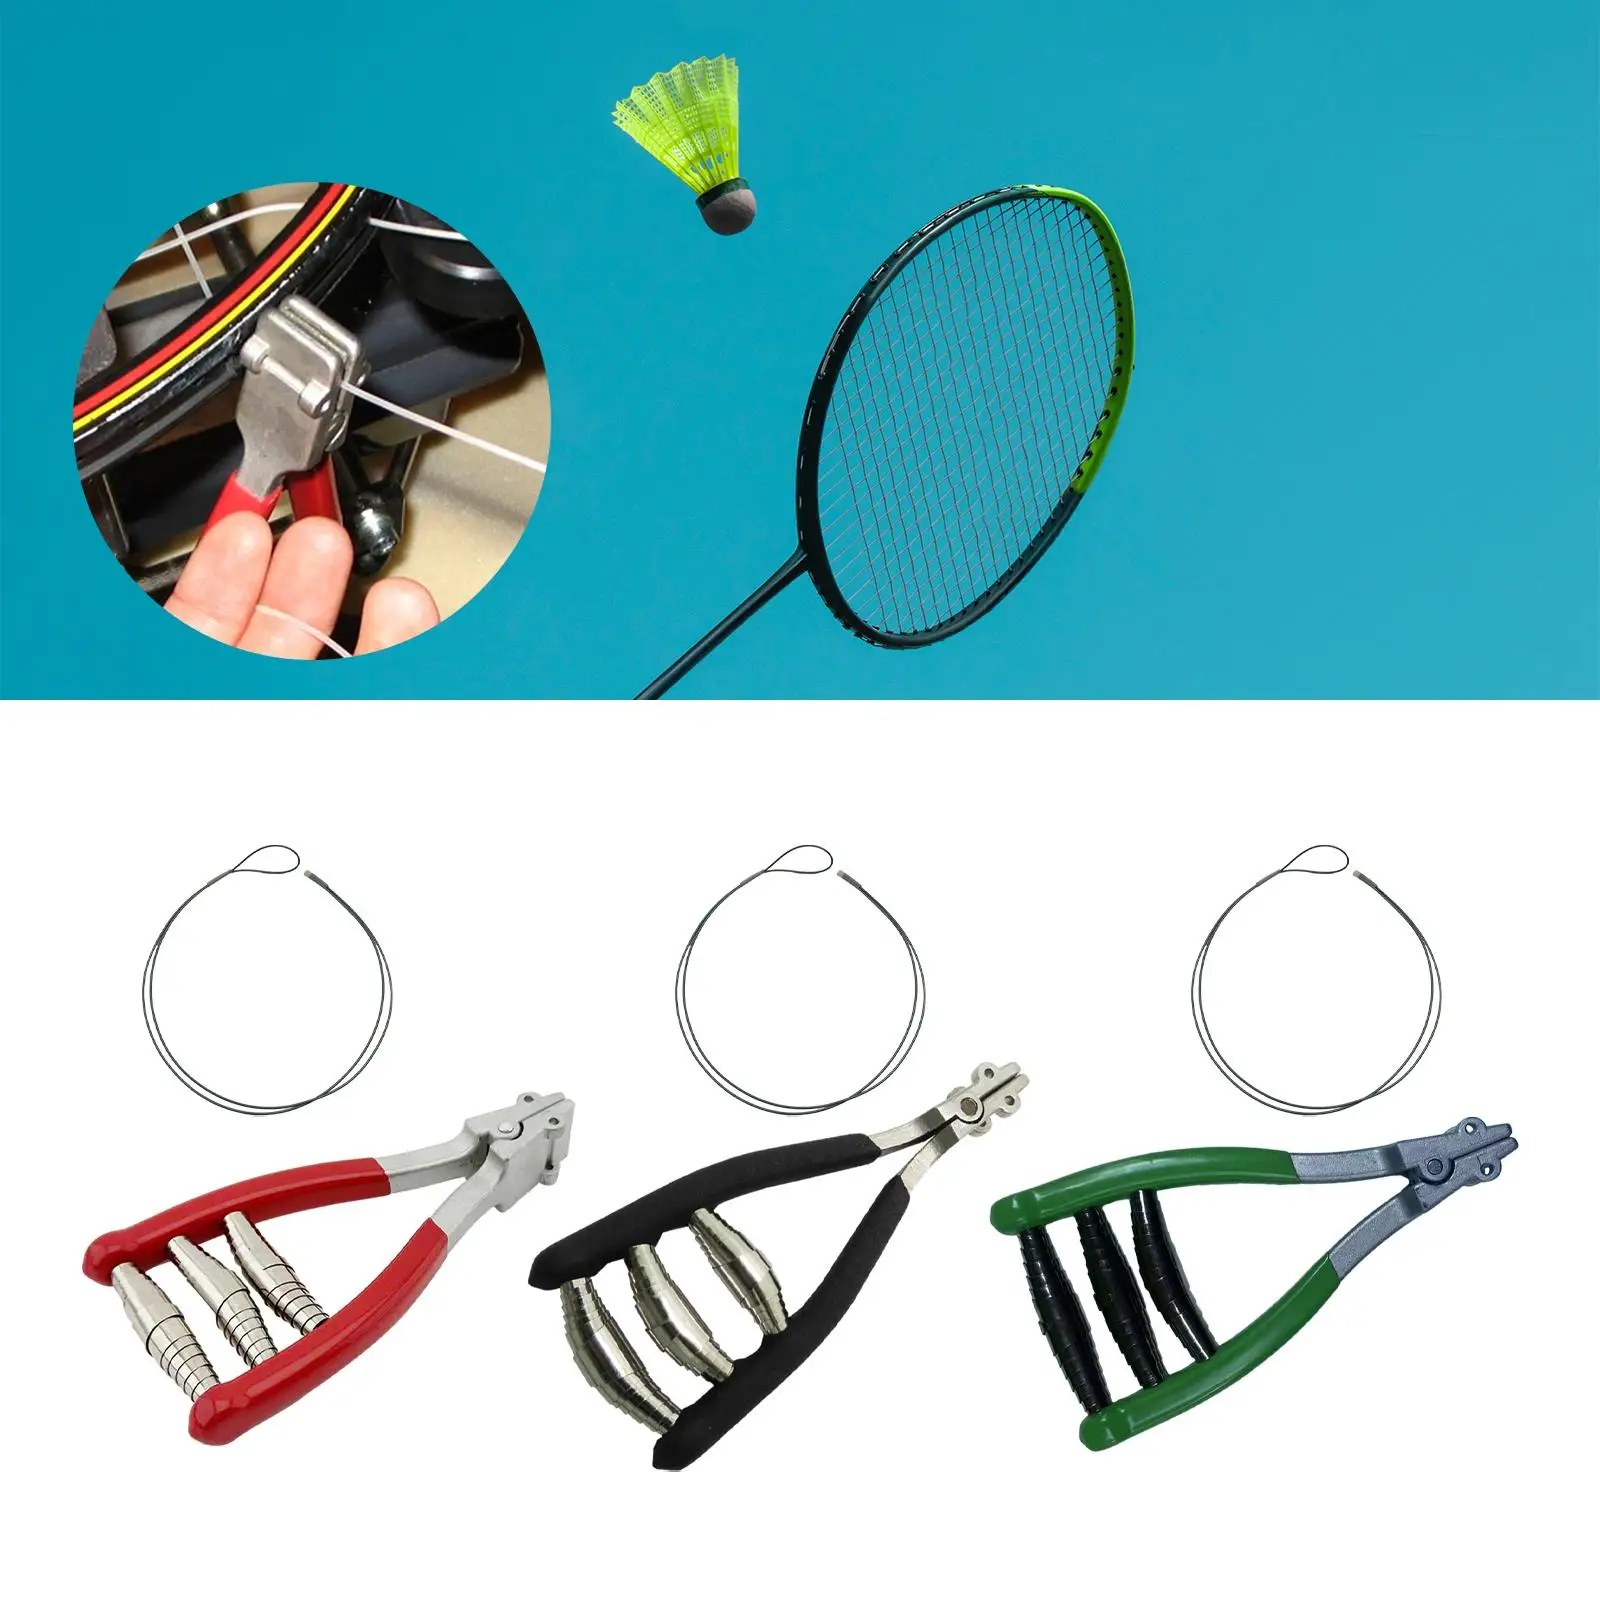 Sports Starting Clamp Badminton Stringing Clamp Manual Portable Clamping Tool for Badminton Racket Tennis Squash Accessories